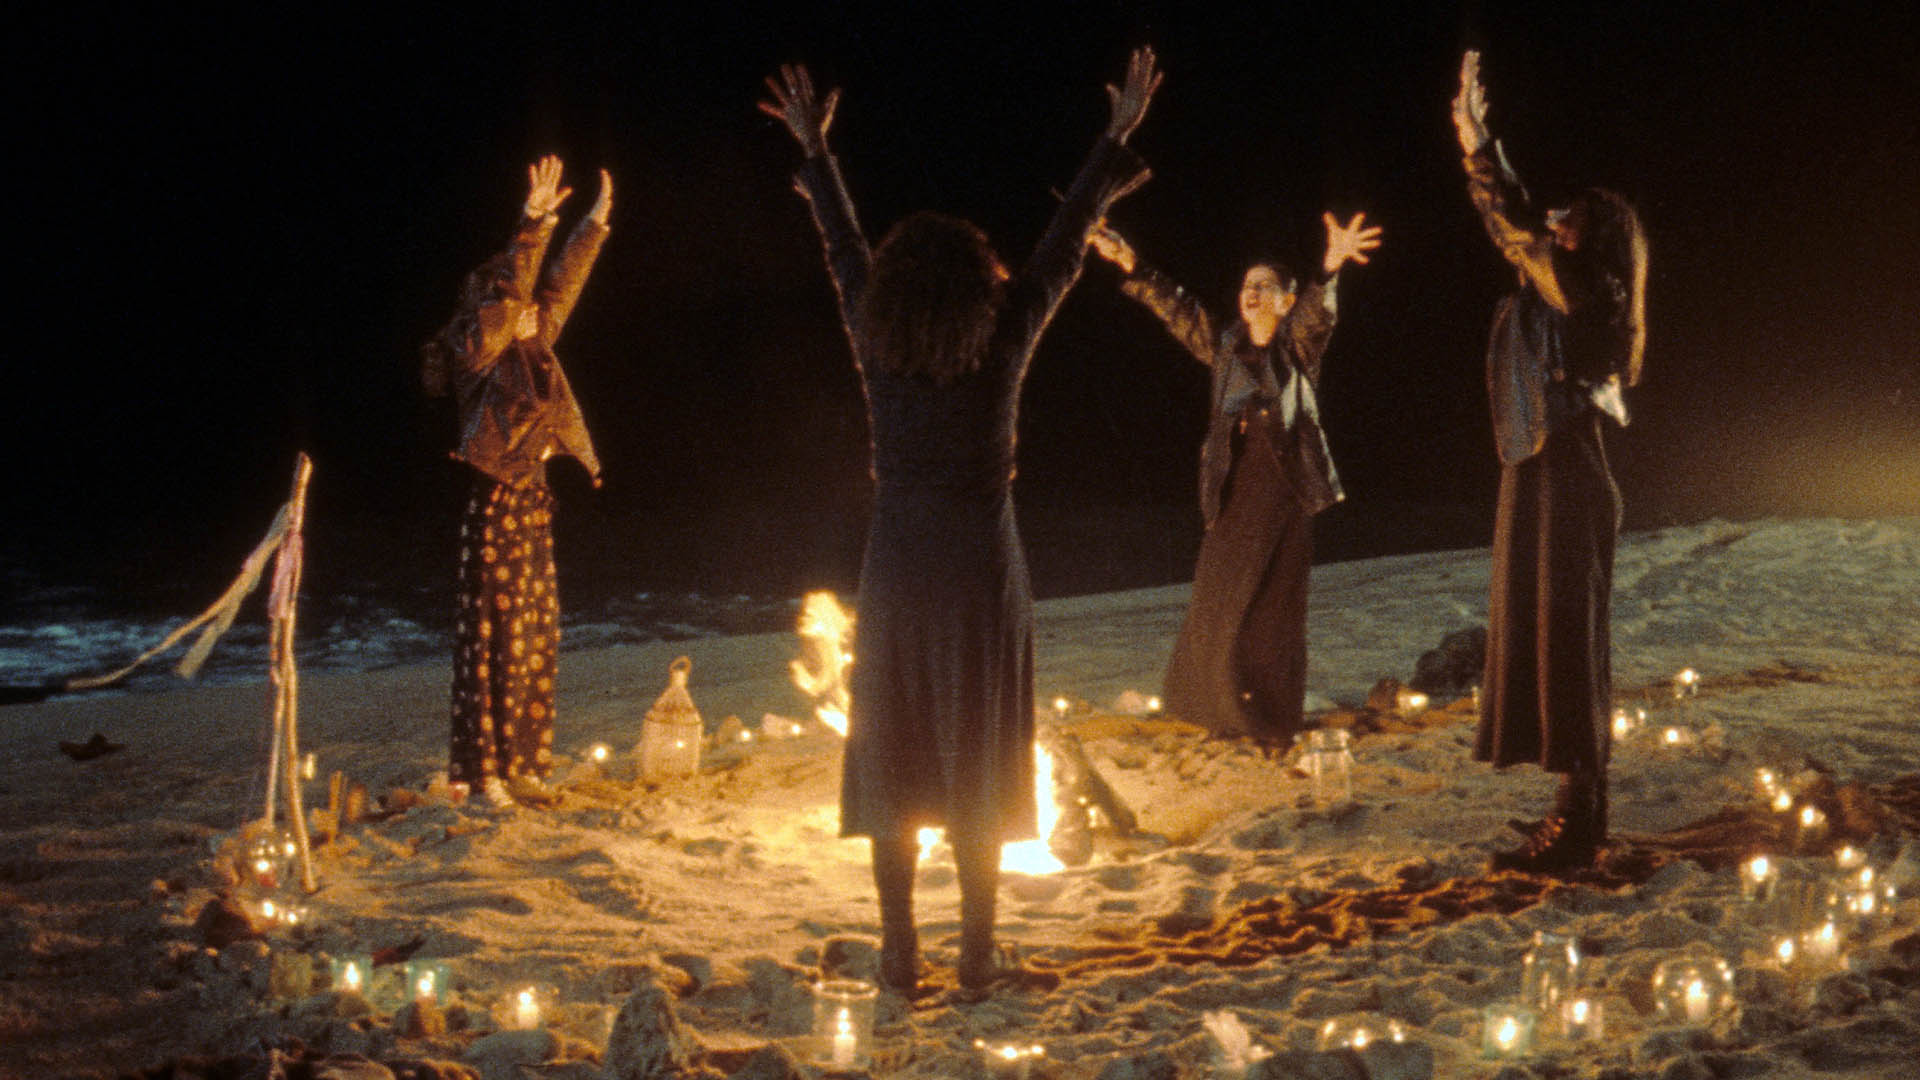 The main characters of The Craft are having a special ceremony on the beach